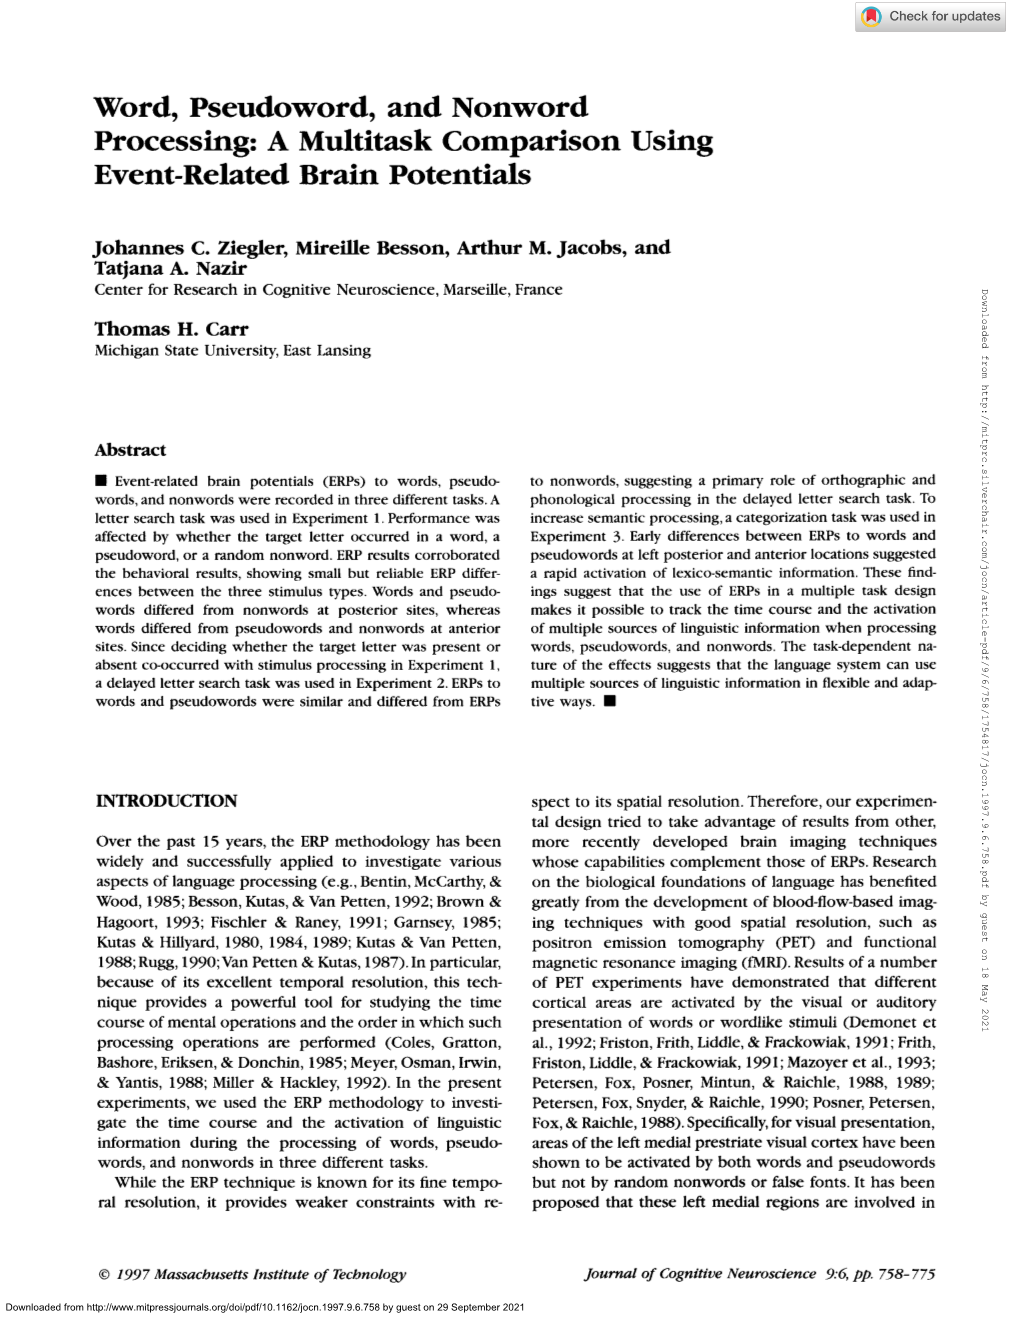 Word, Pseudoword, and Nonword Processing: a Multitask Comparison Using Event-Related Brain Potentials